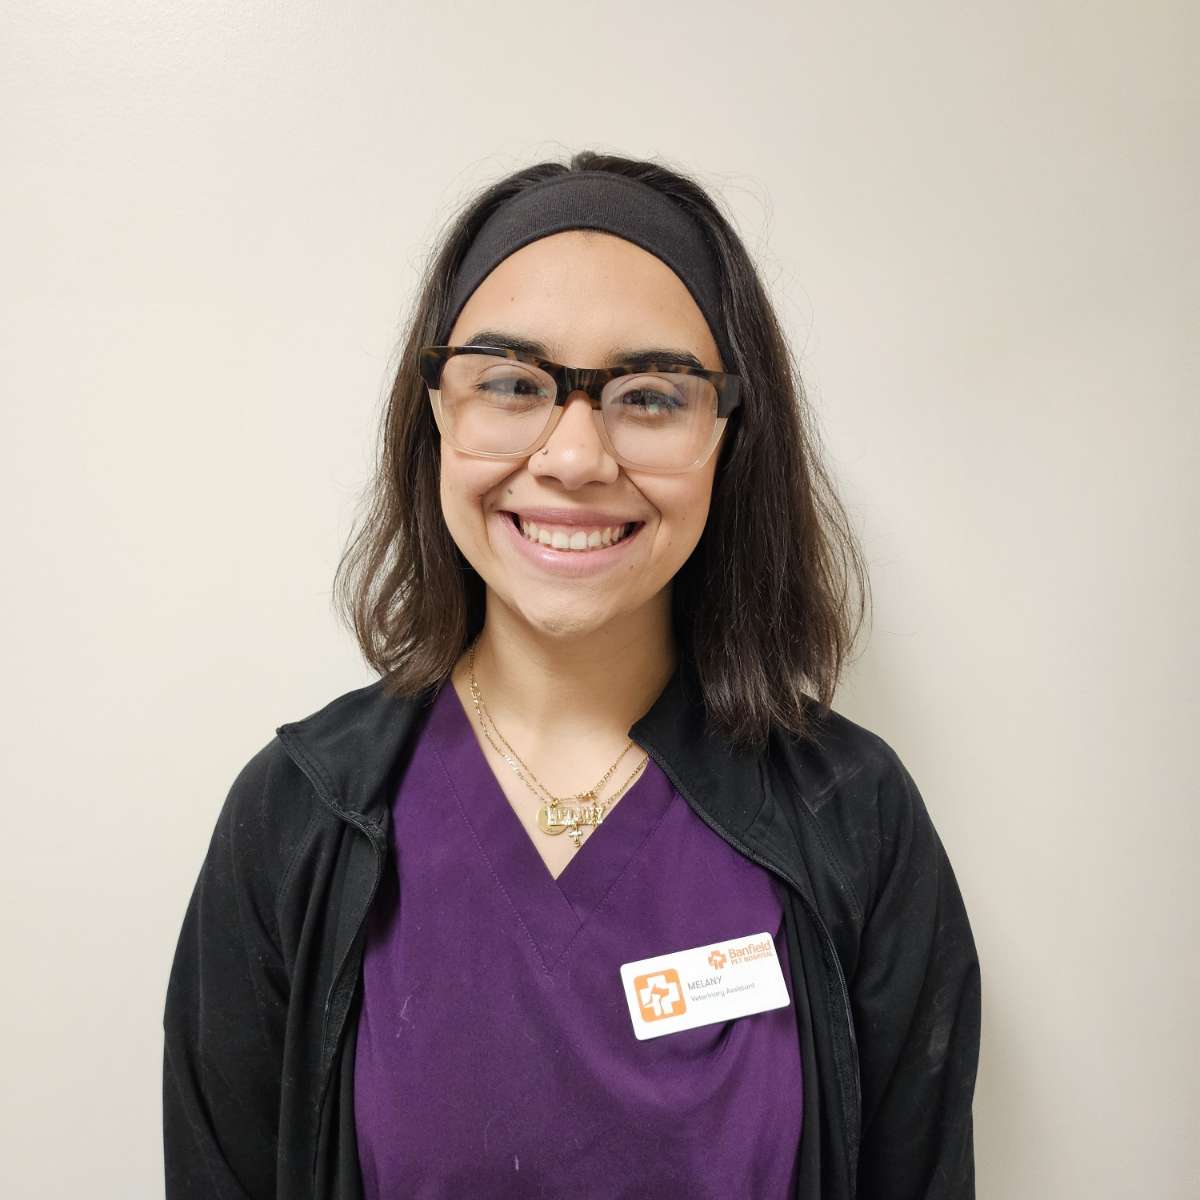 Profile picture of Melany Garcia, Veterinary Assistant